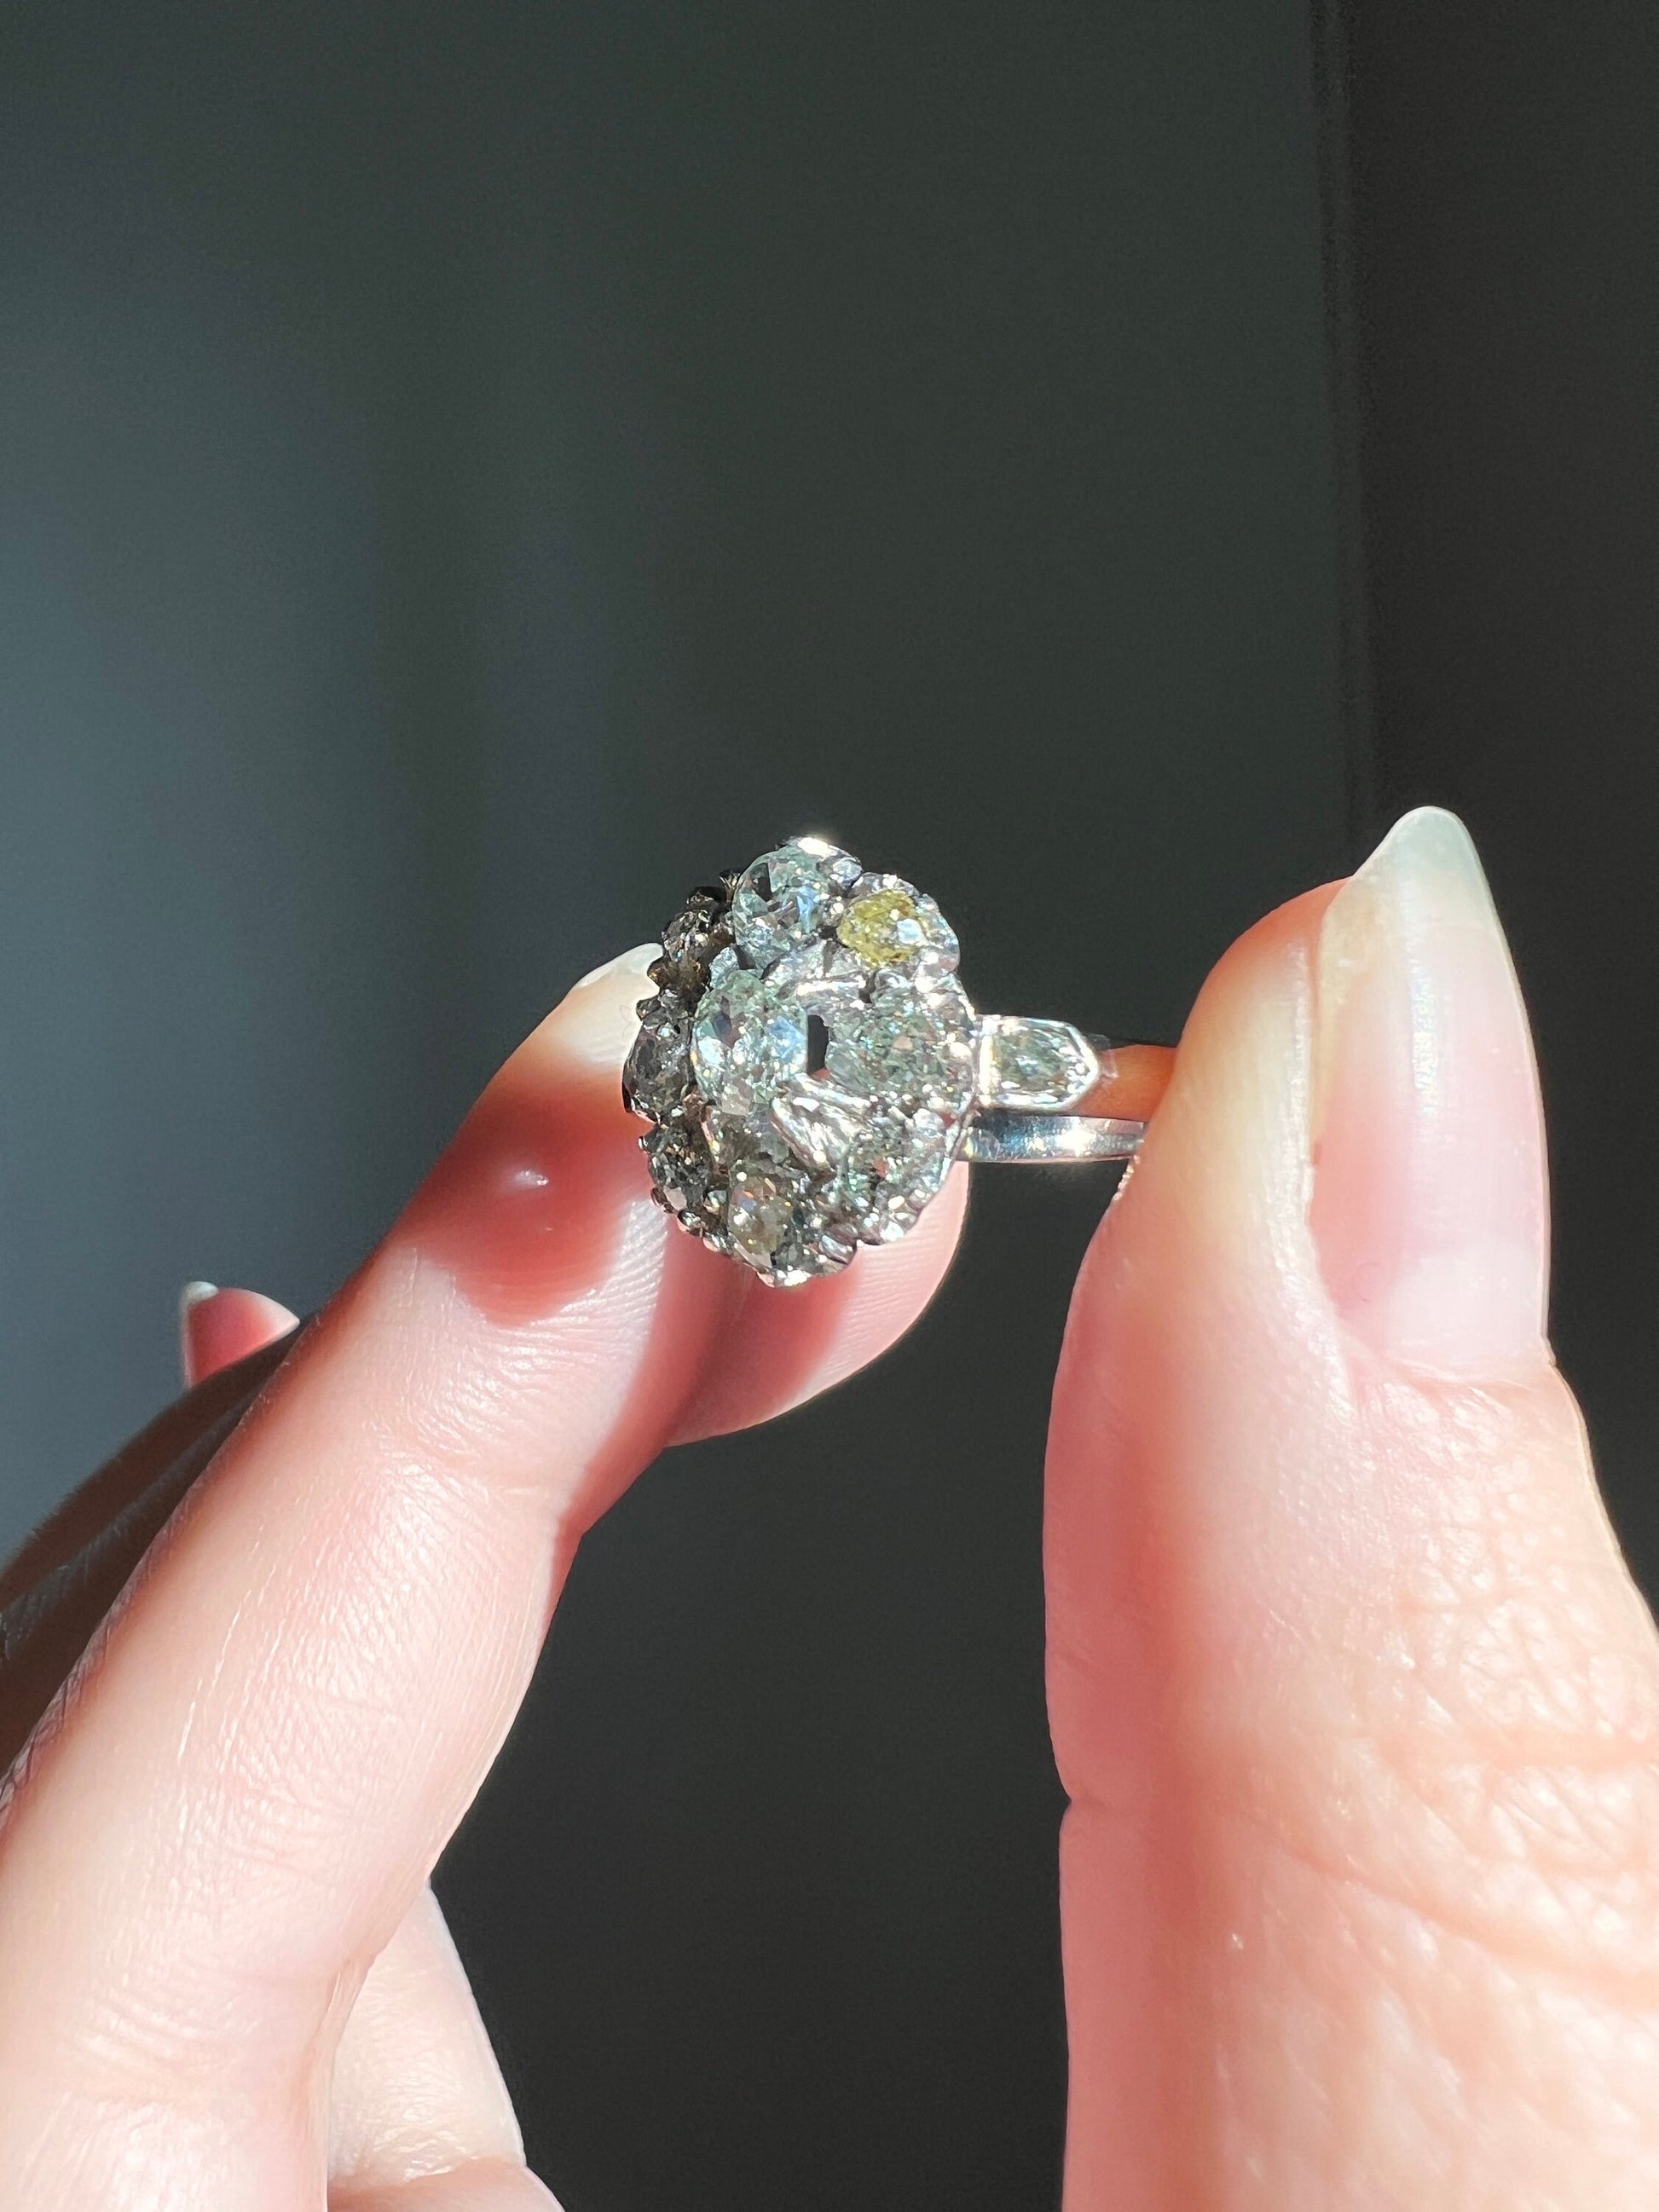 BLUE Diamonds and YELLOW One of a Kind 1 Carat Old Mine Cut Cluster Ring French ANTIQUE Rhodium 18k Yellow Gold Victorian Gift OmC Ooak Rare